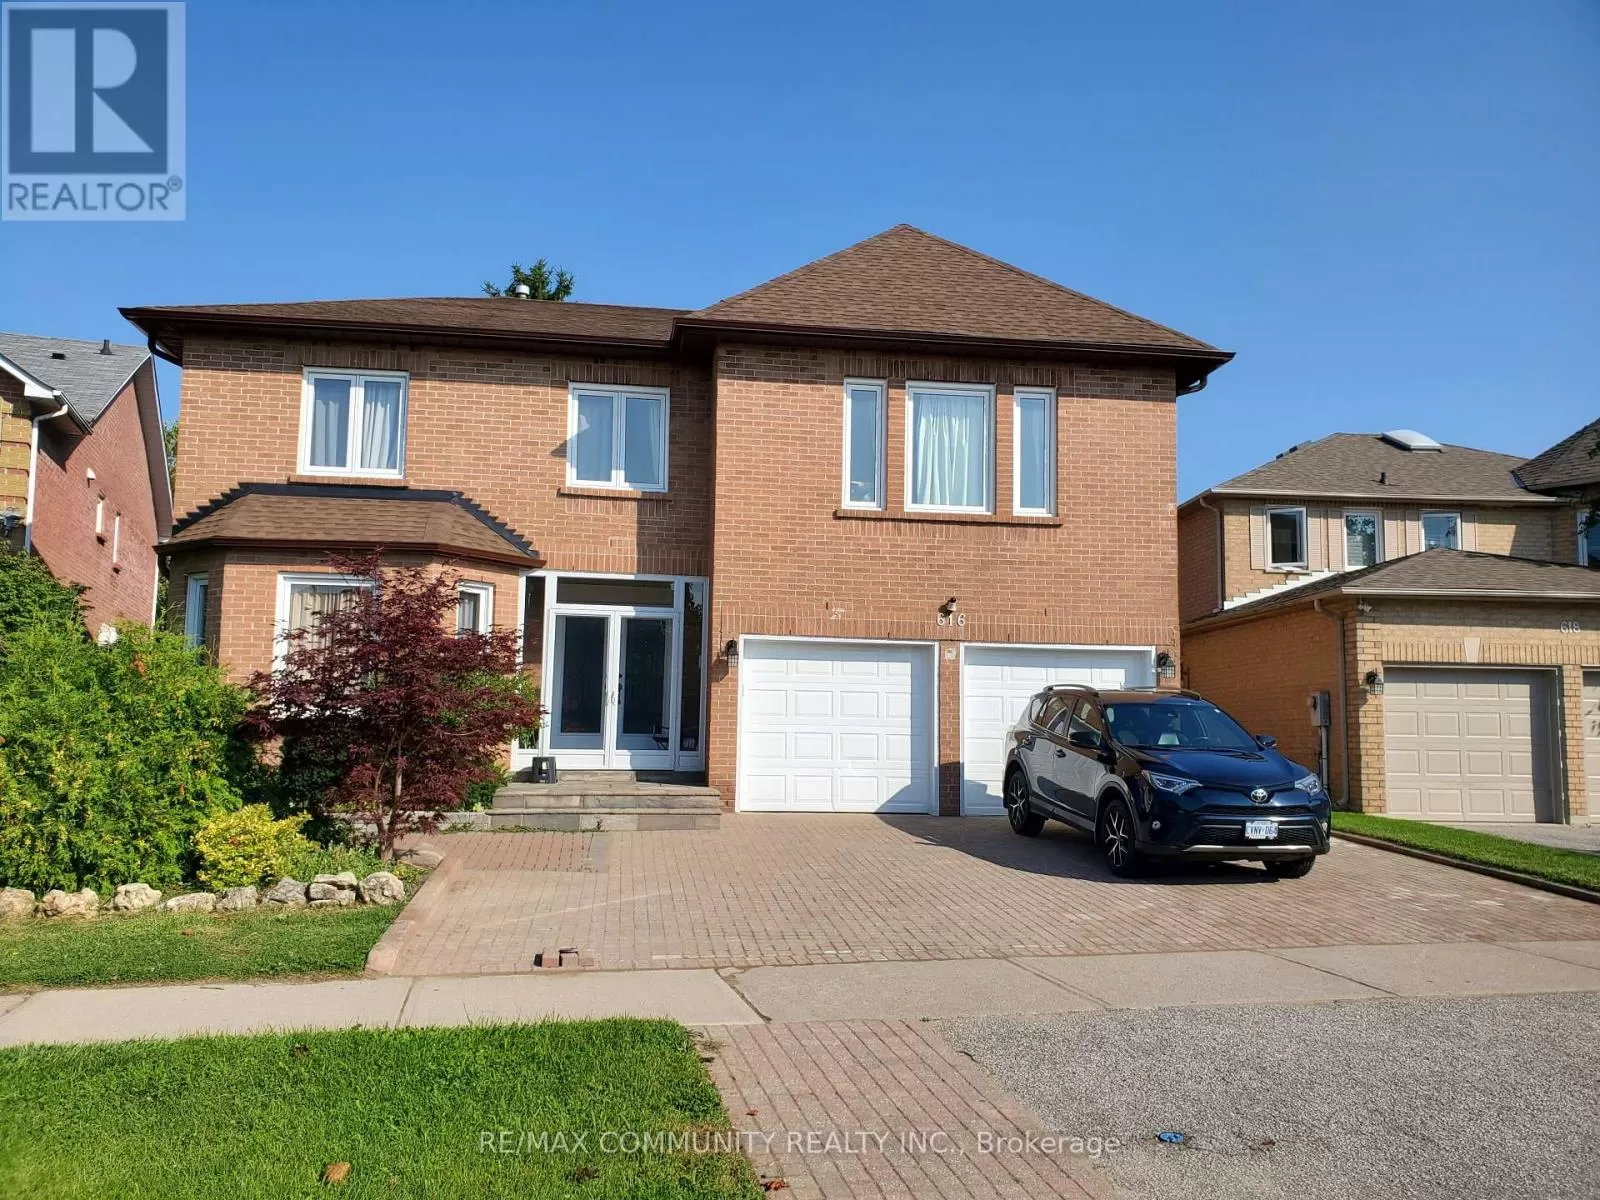 House for rent: #bsmt -616 Strouds Lane, Pickering, Ontario L1V 4S9